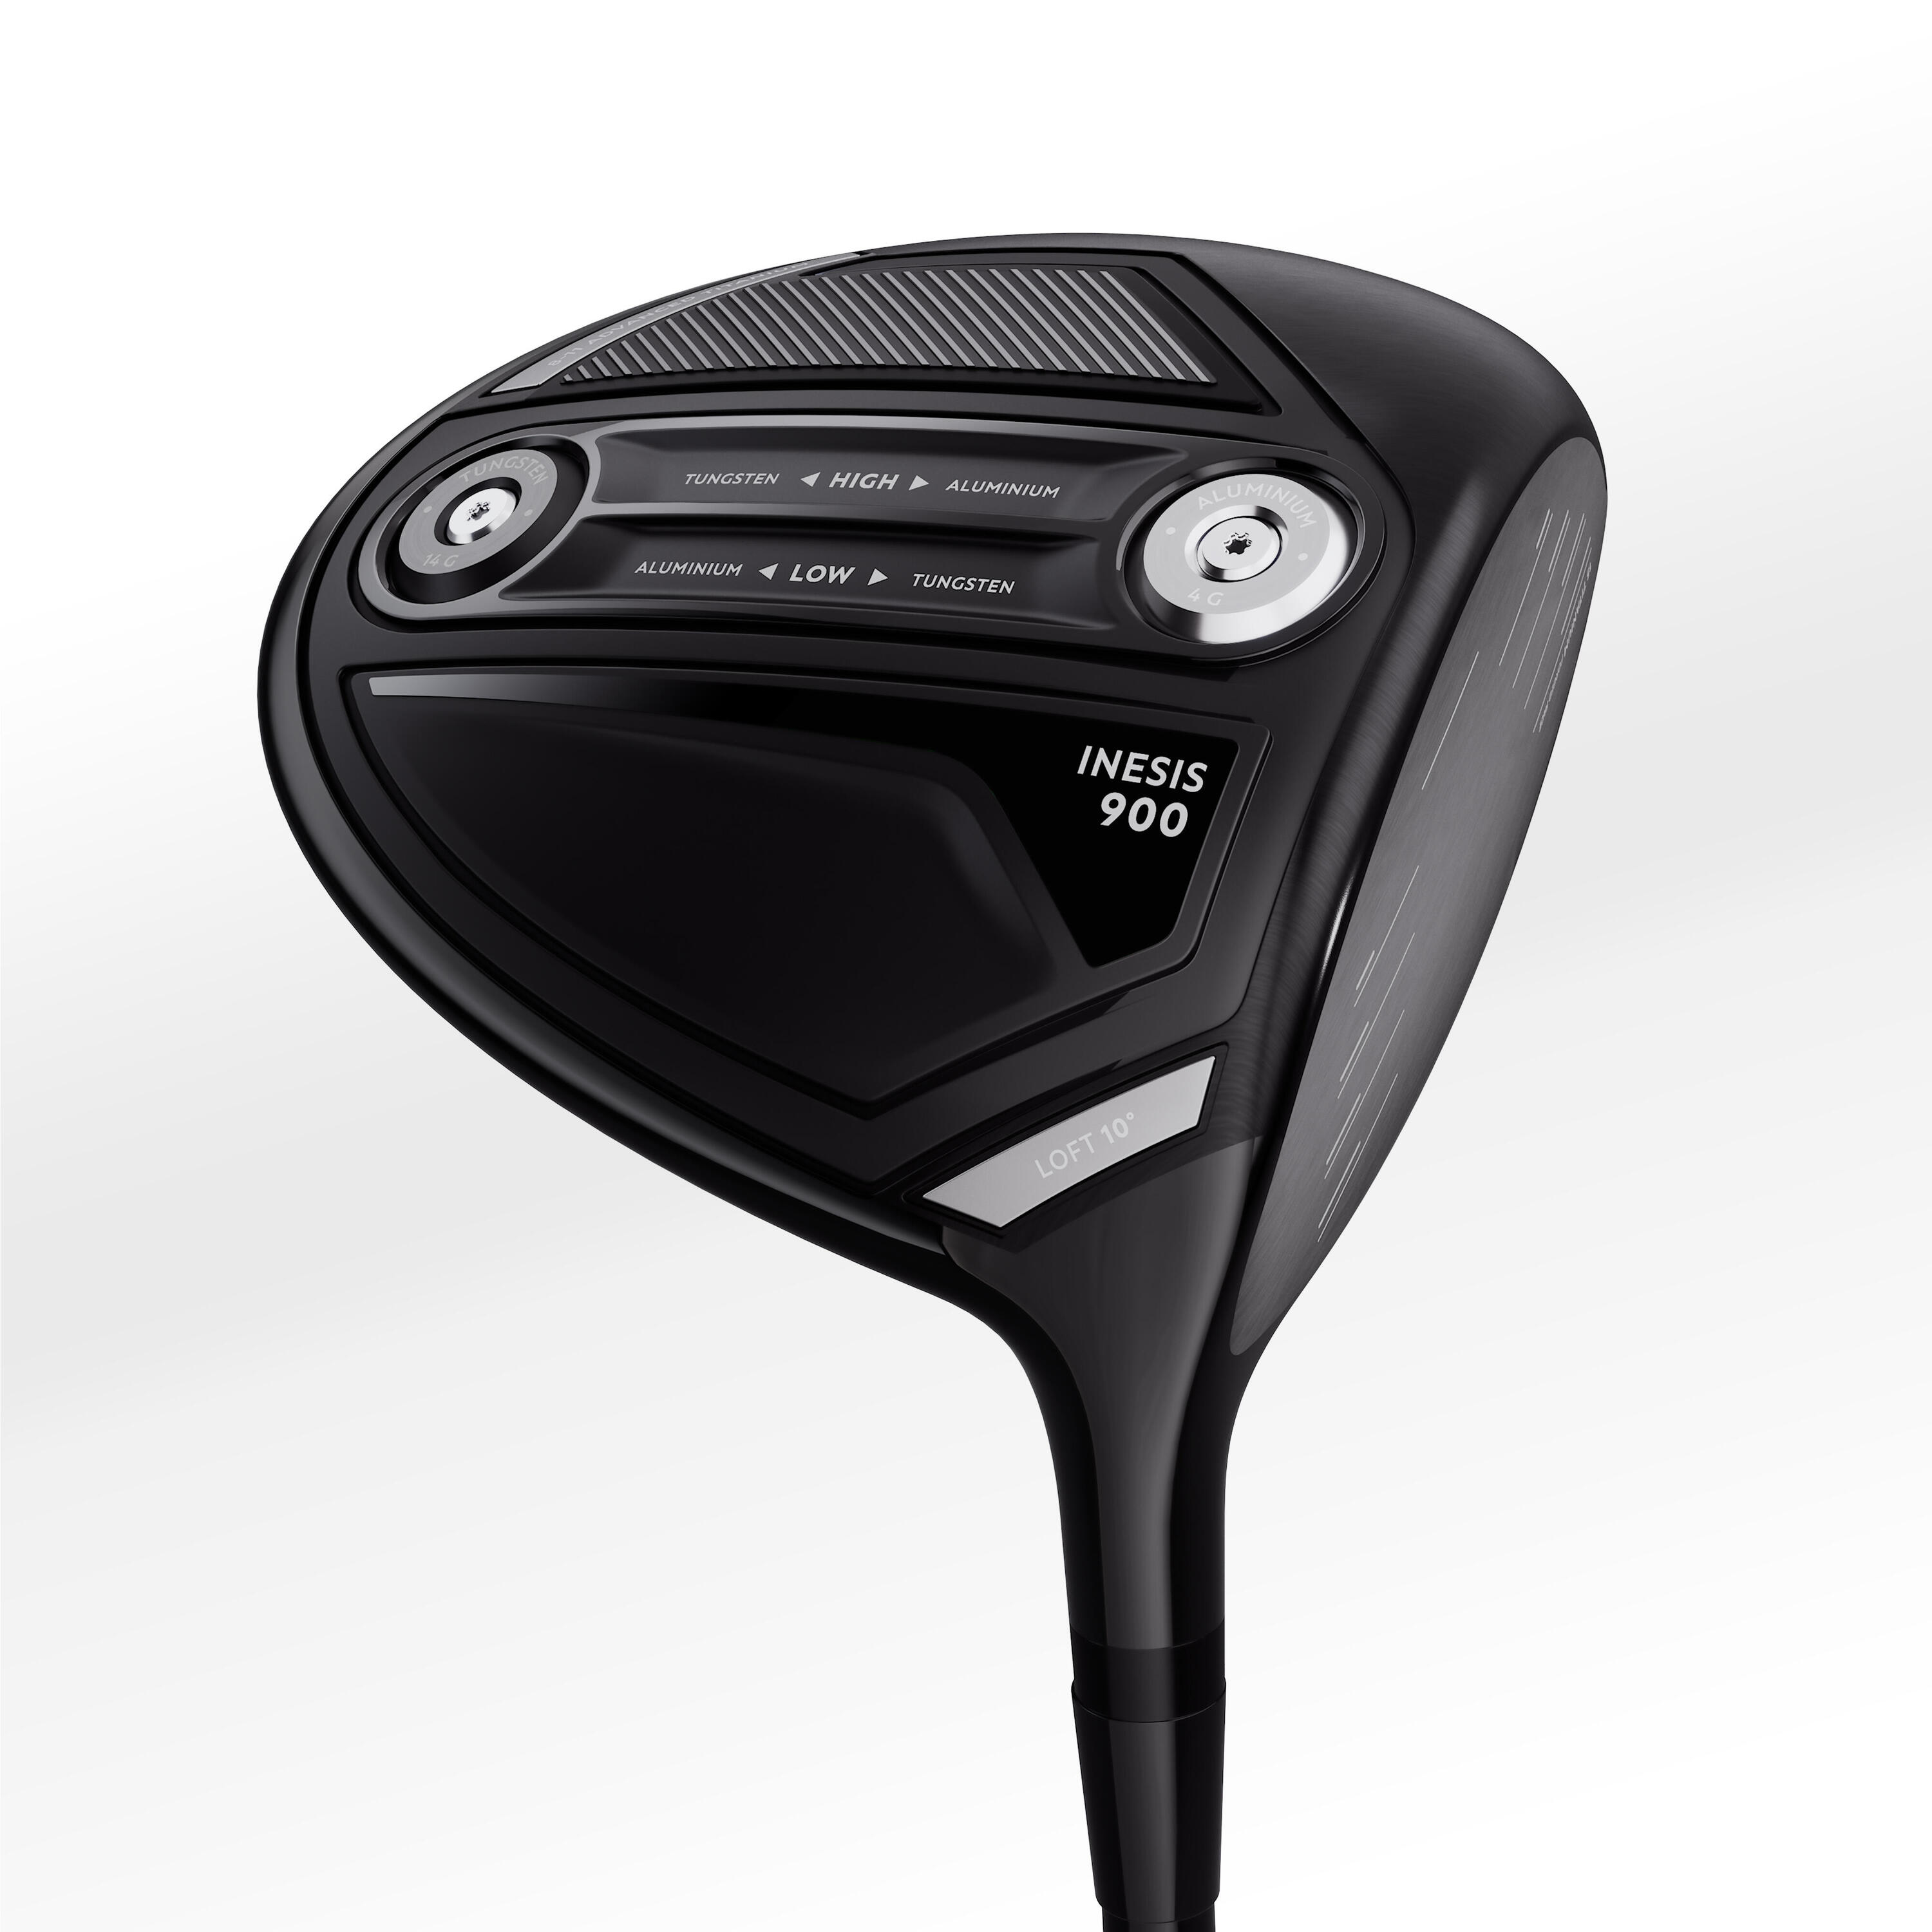 INESIS Golf driver right handed high speed - INESIS 900